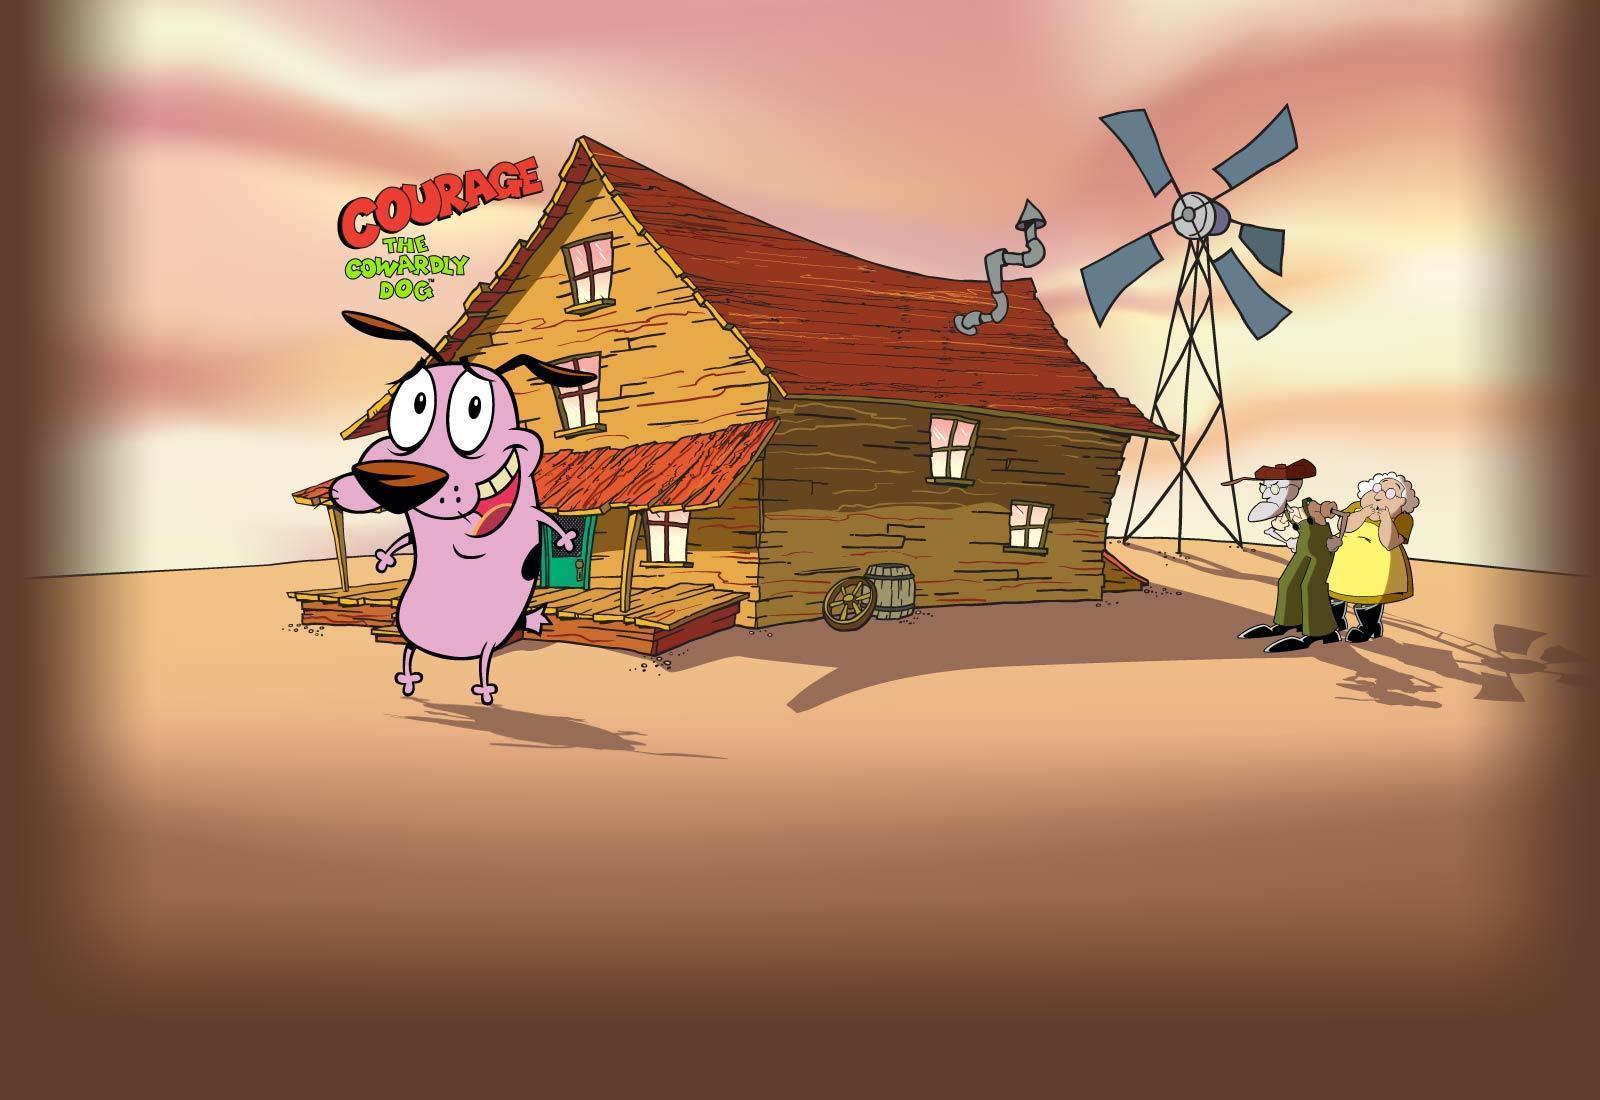 Courage The Cowardly Dog House Wallpaper